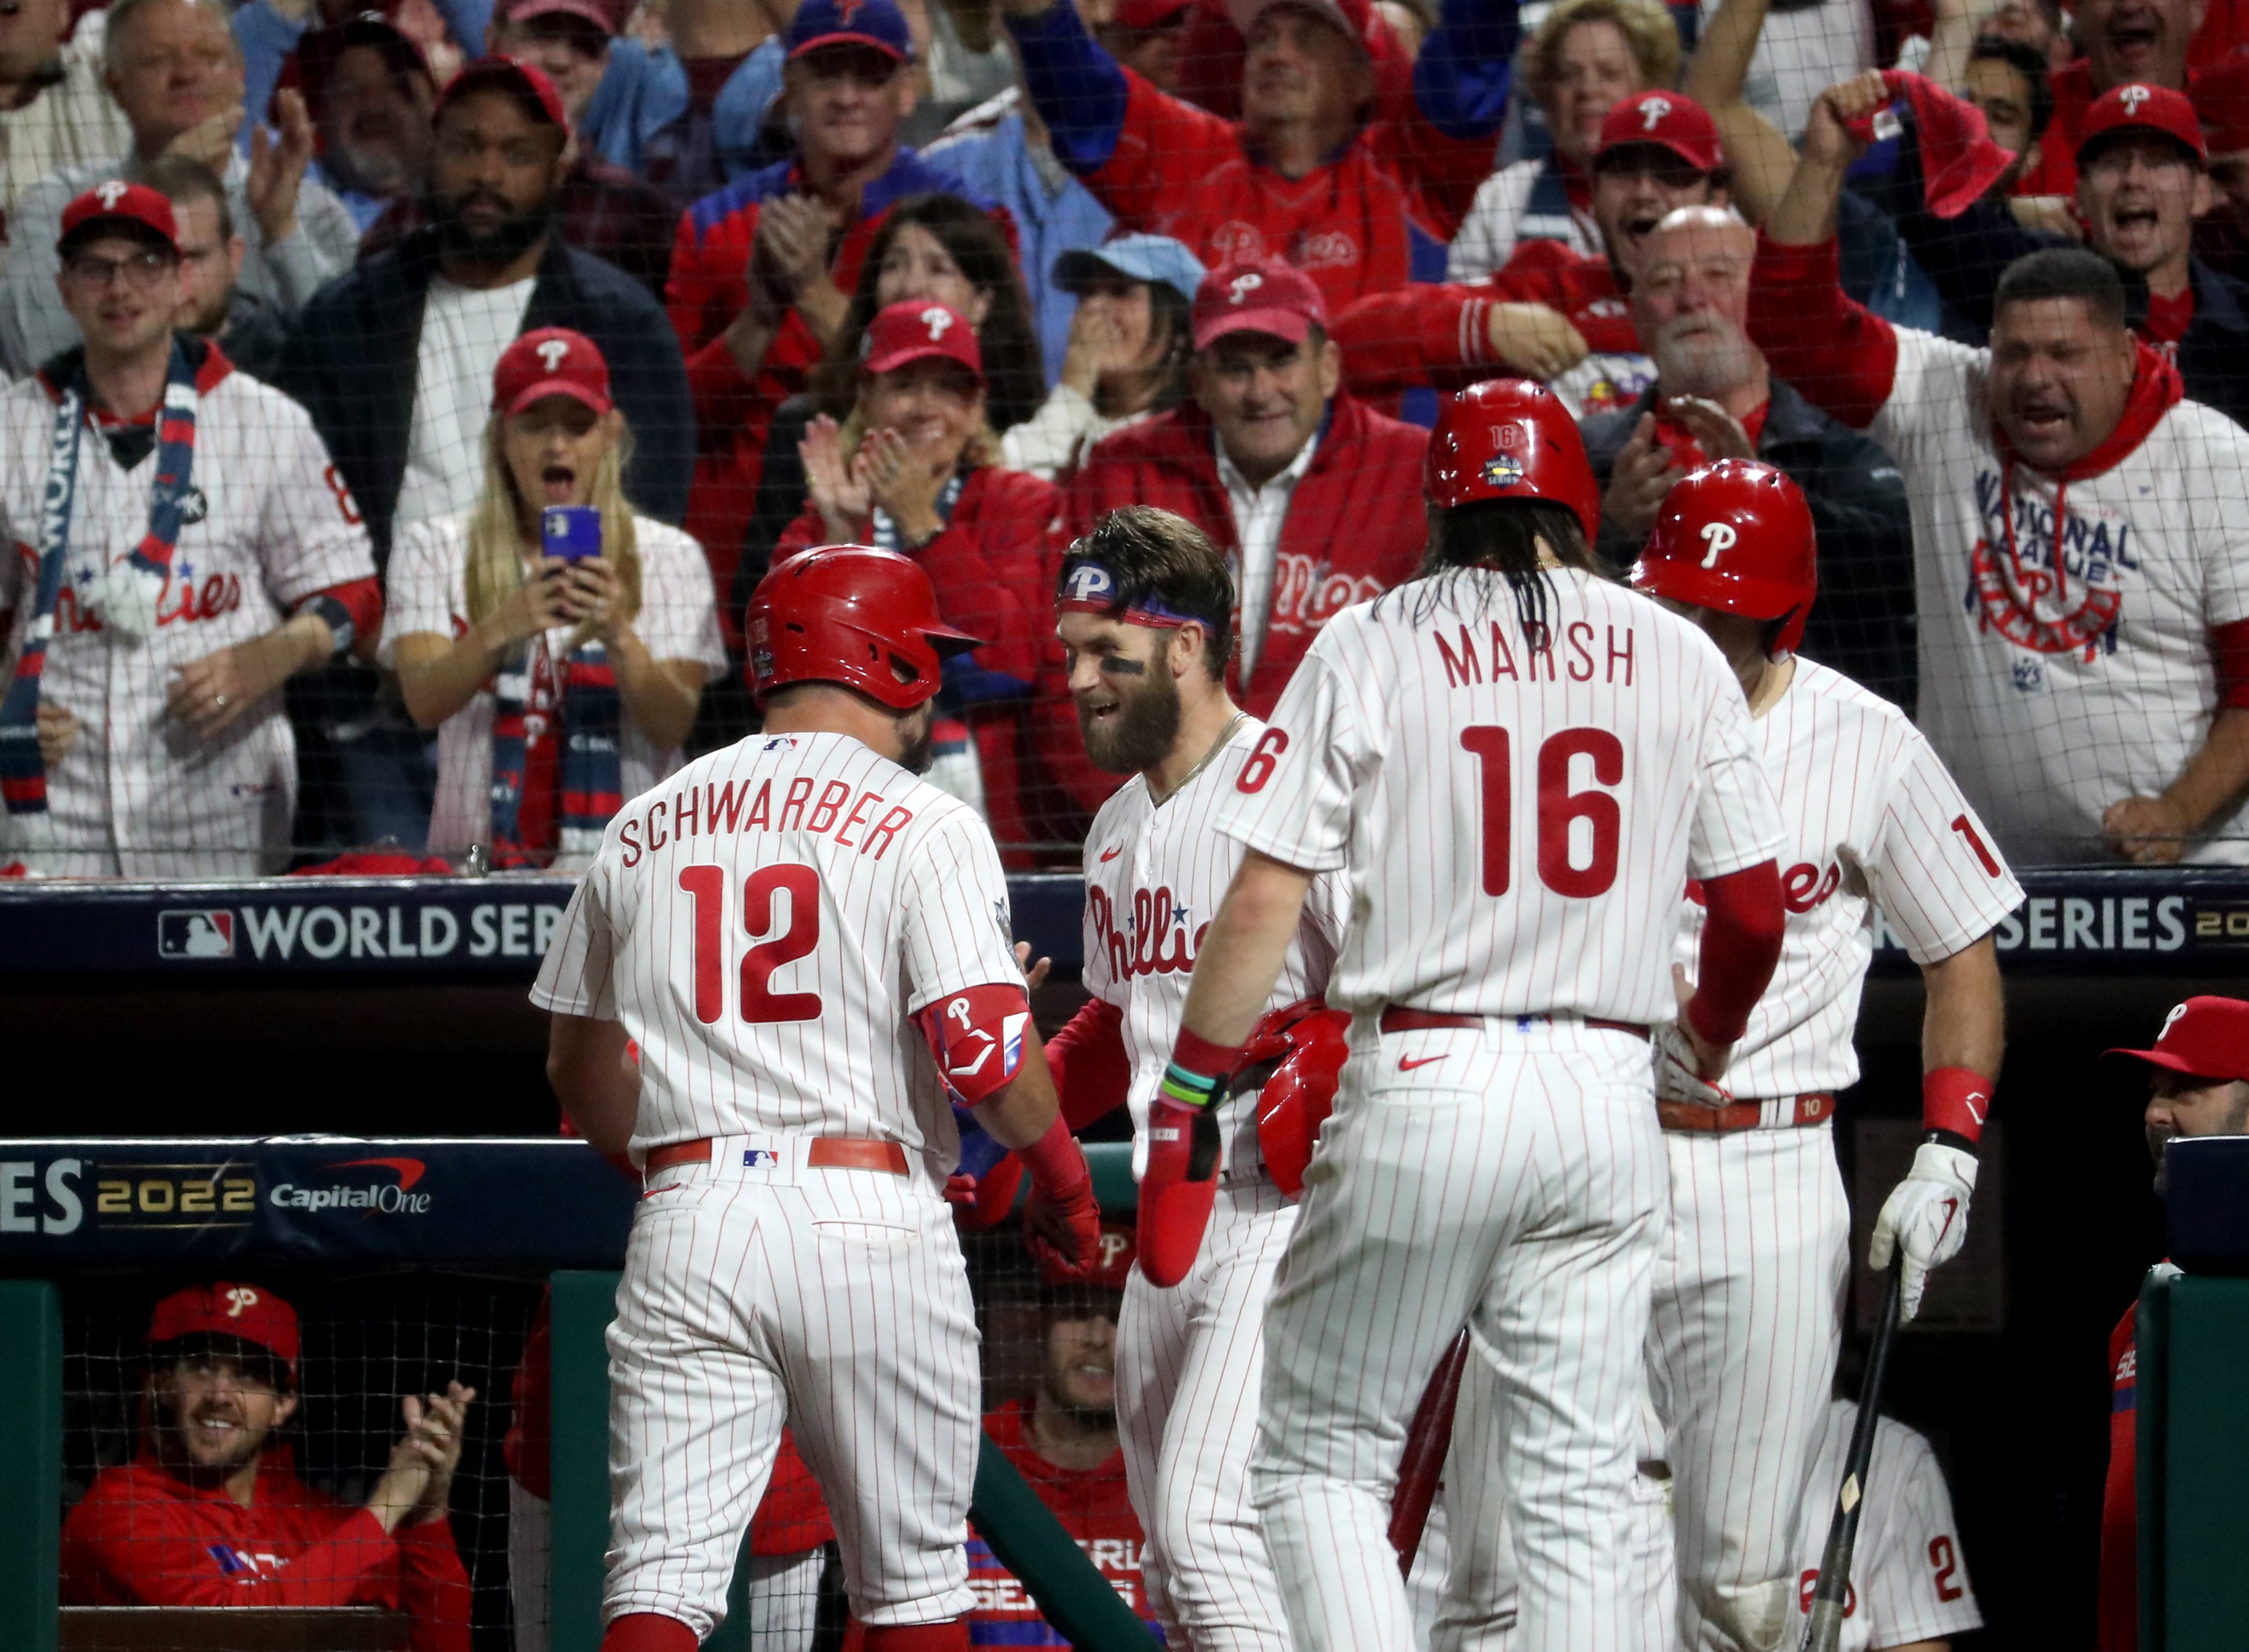 Kyle Schwarber (12) of the Philadelphia Phillies celebrates a 2-run home run in the fifth inning to give the Phillies a 6-0 lead during World Series Game 3 against the Houston Astros at Citizens Bank Park, Tuesday, Nov. 1, 2022.